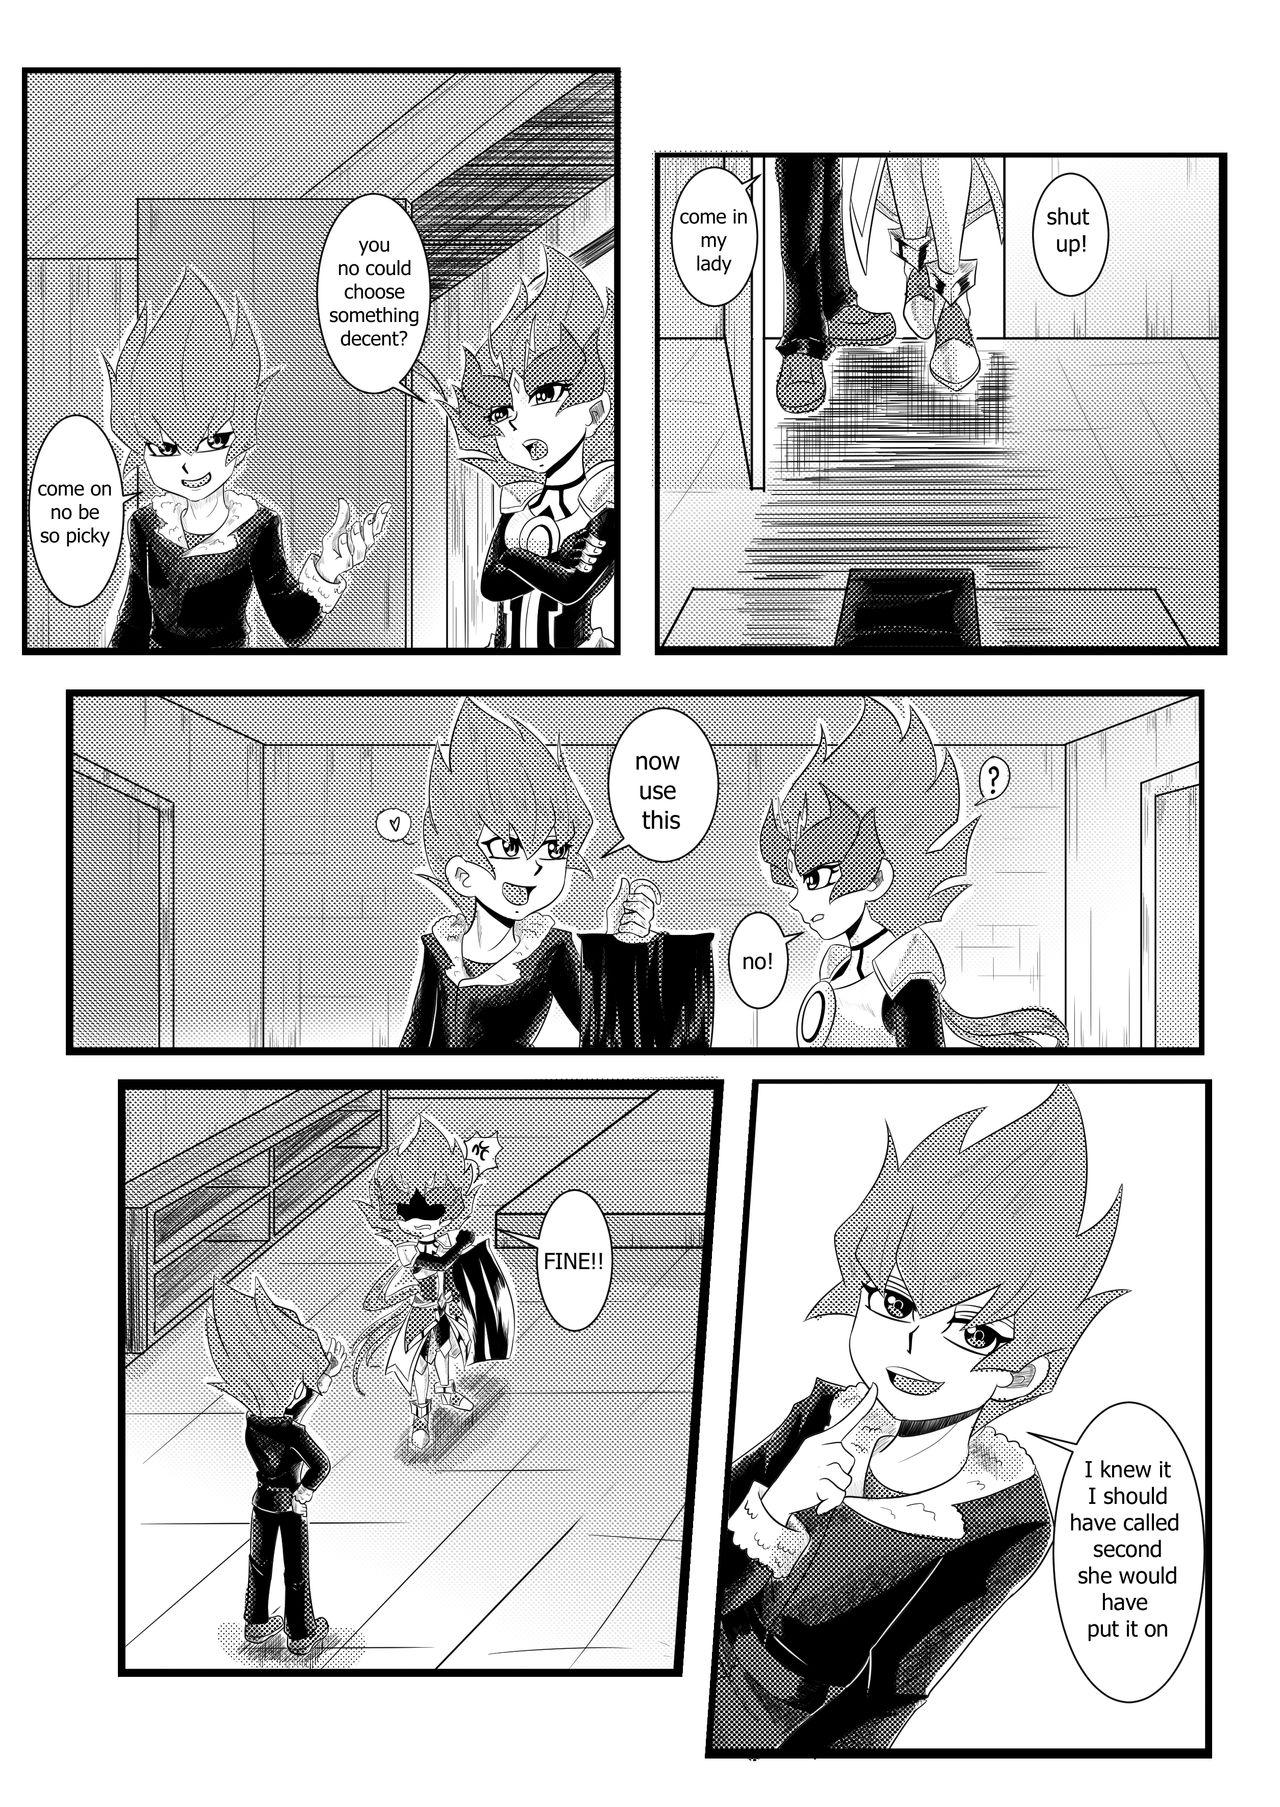 Hardcore For Her - Yu-gi-oh zexal Euro - Page 10